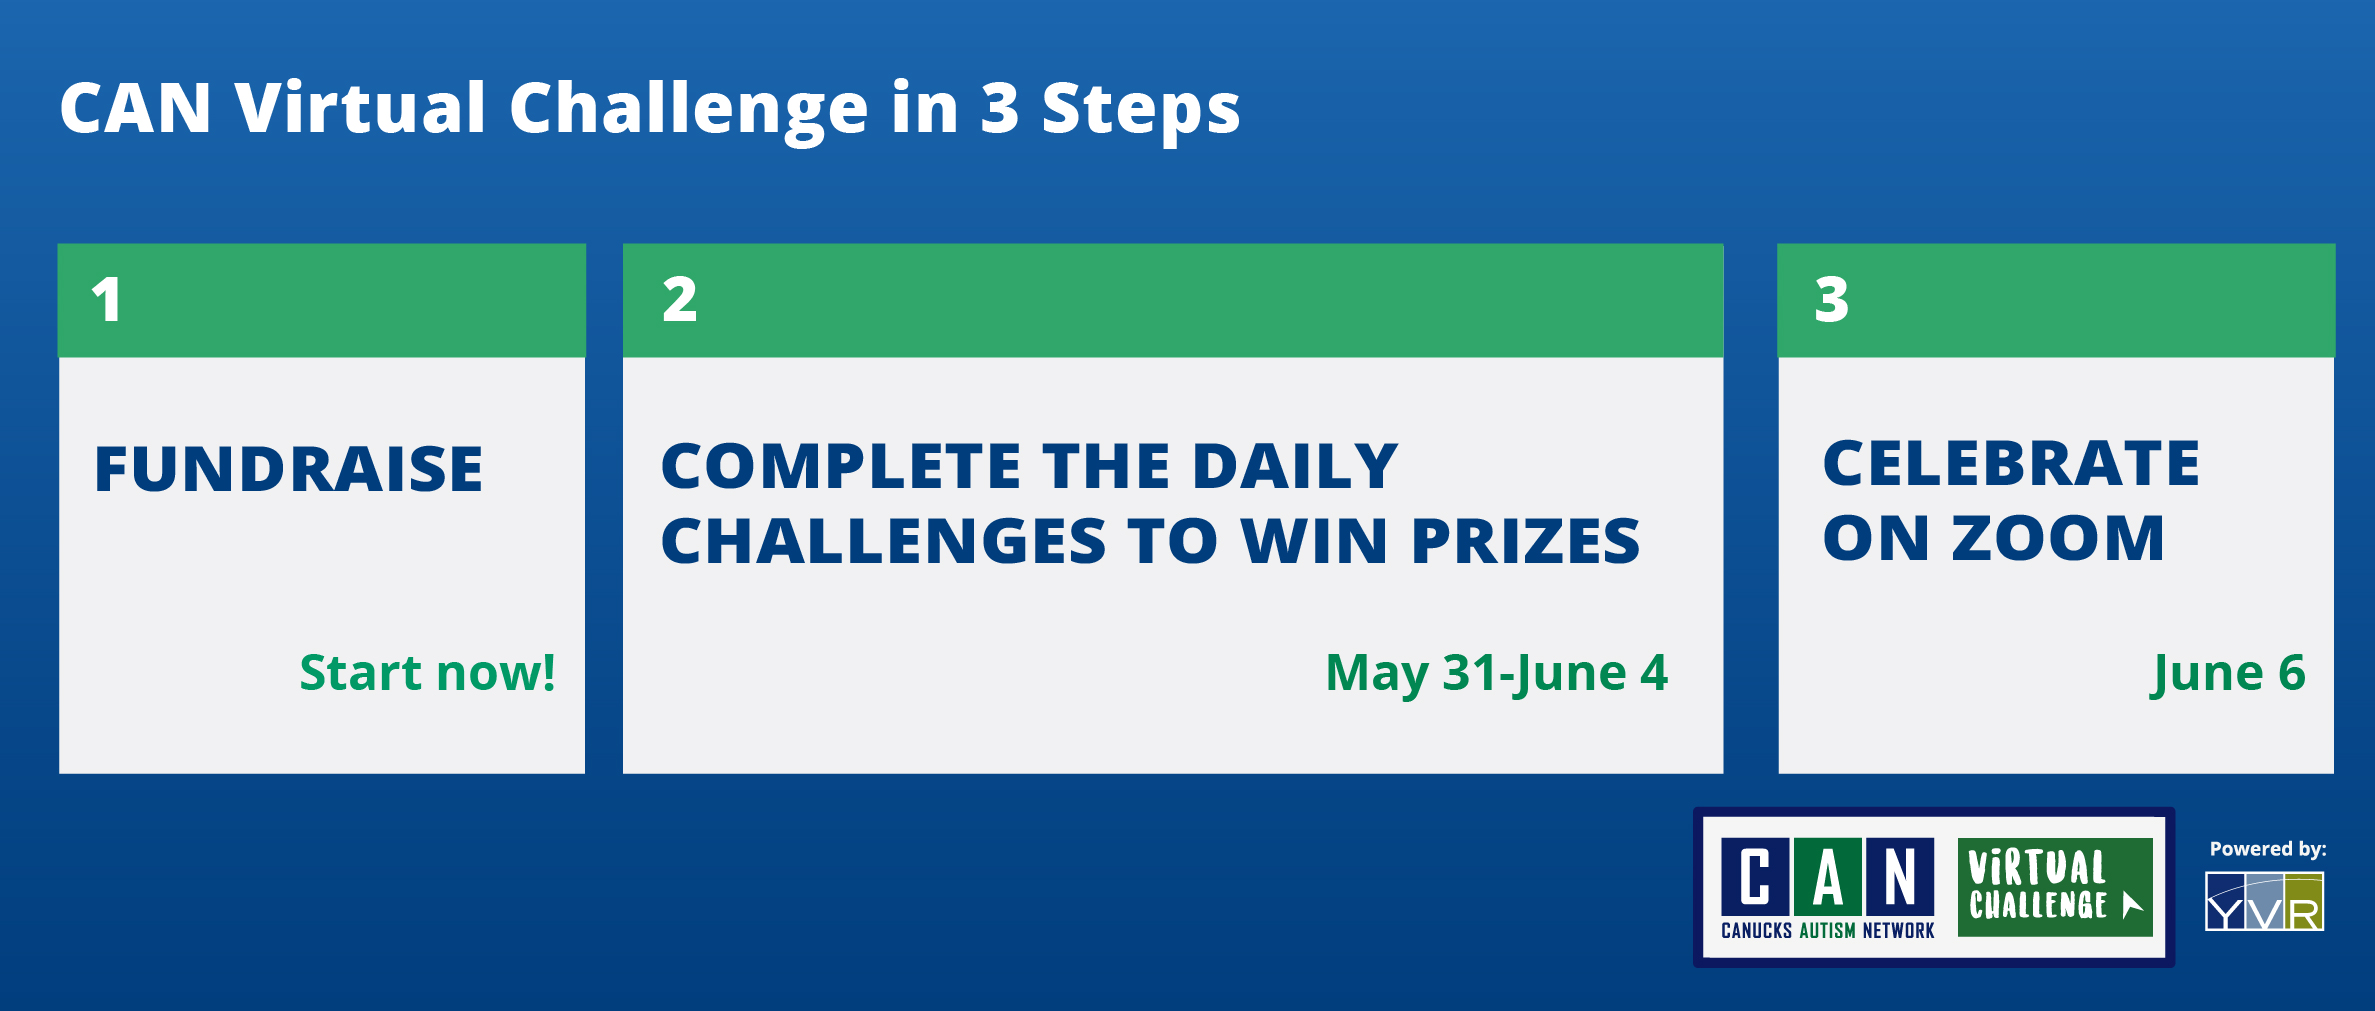 can-virtual-challenge-participate.jpg